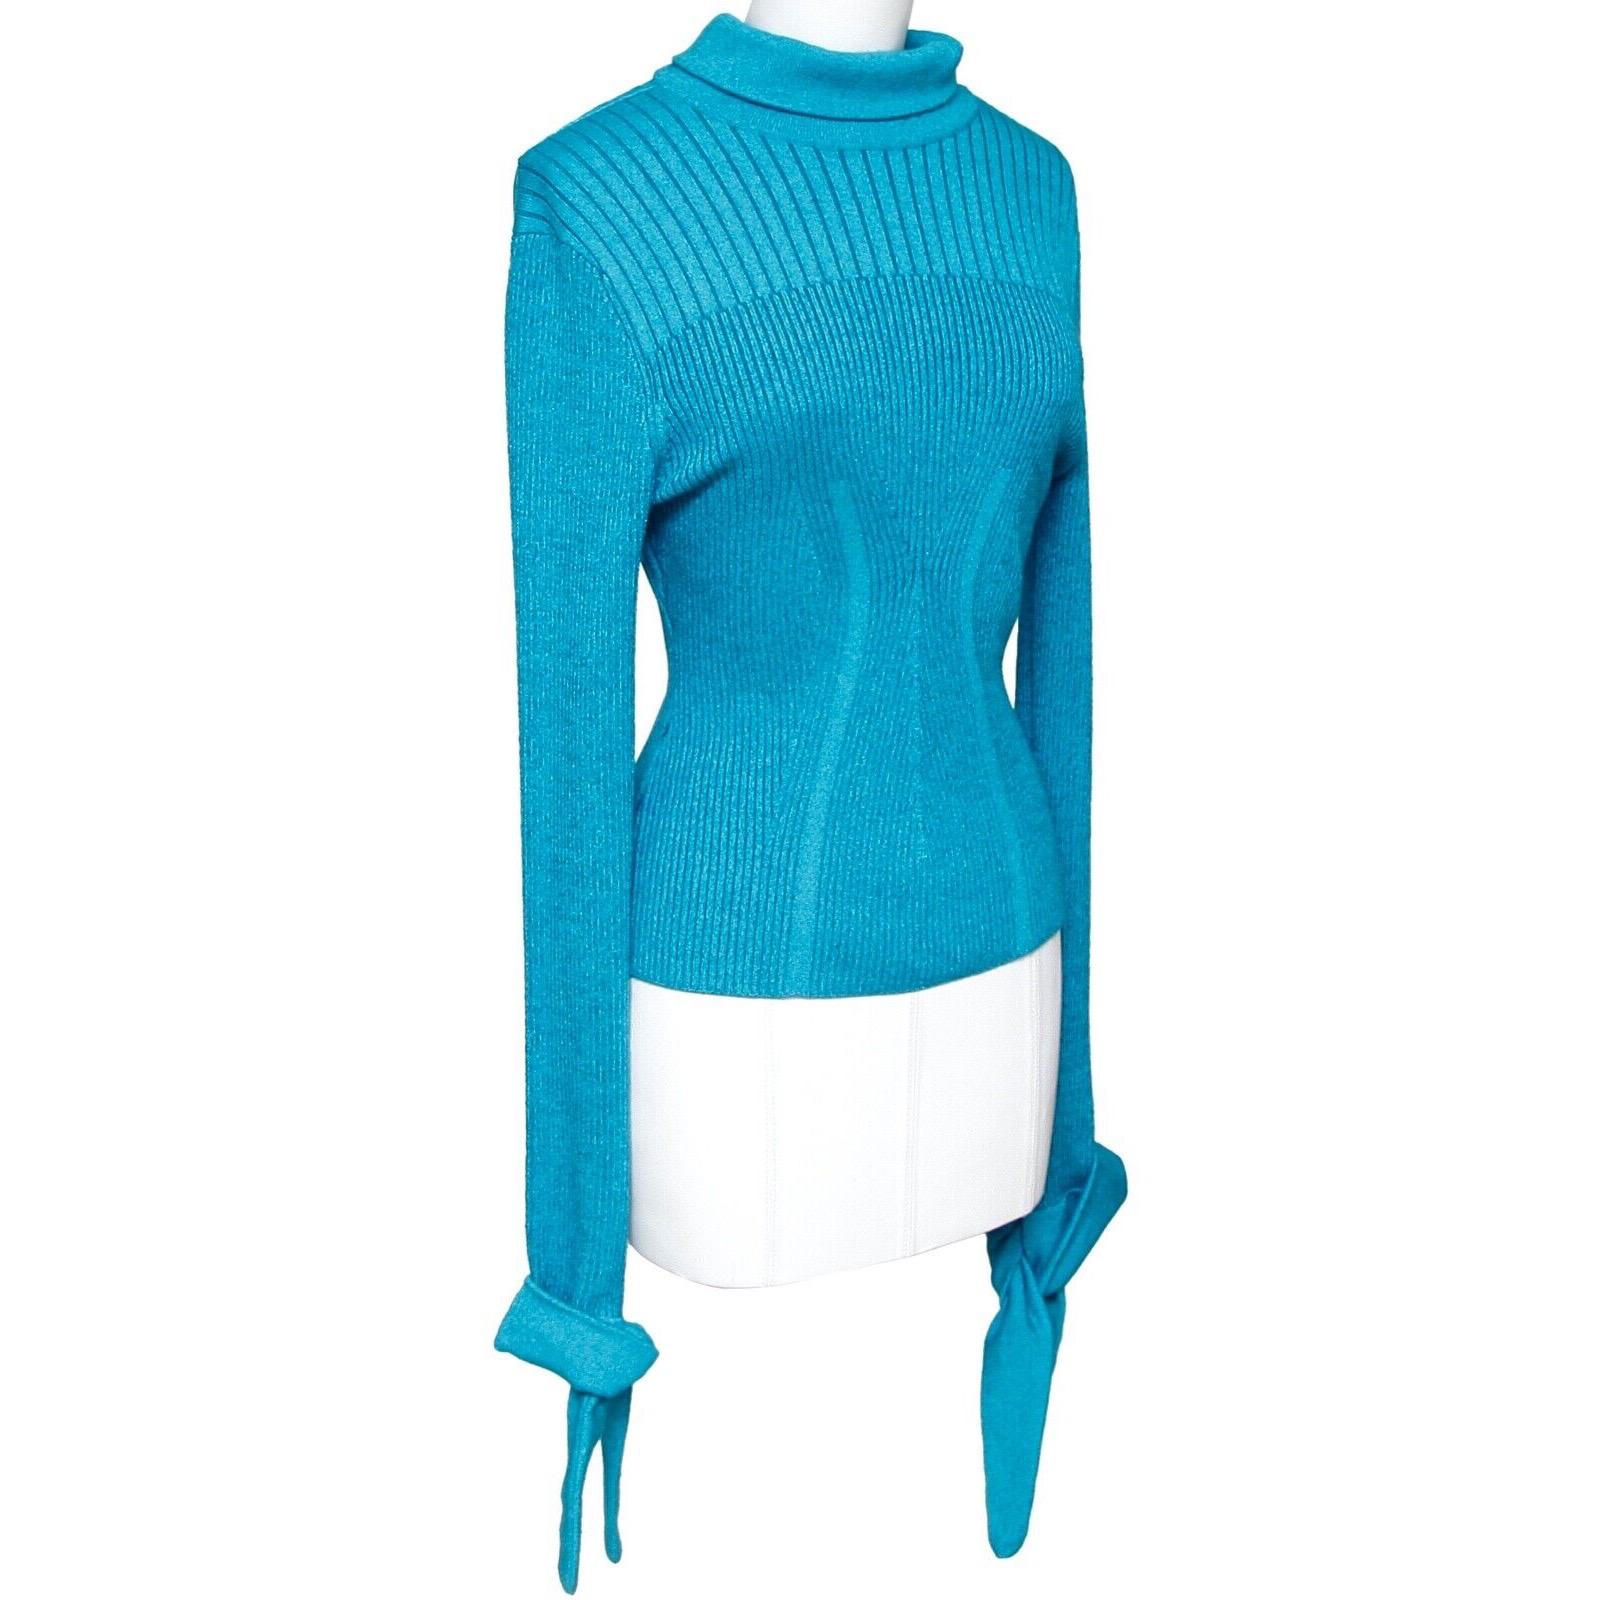 GUARANTEED AUTHENTIC CAROLINA HERRERA BLUE MOCK NECK KNIT SWEATER

Matching Skirt Is Available For Sale In A Separate Listing

Details:
- Blue color.
- Mock neck with sash tie at back.
- Long sleeve with sash tie at wrist.
- Pull on.
-